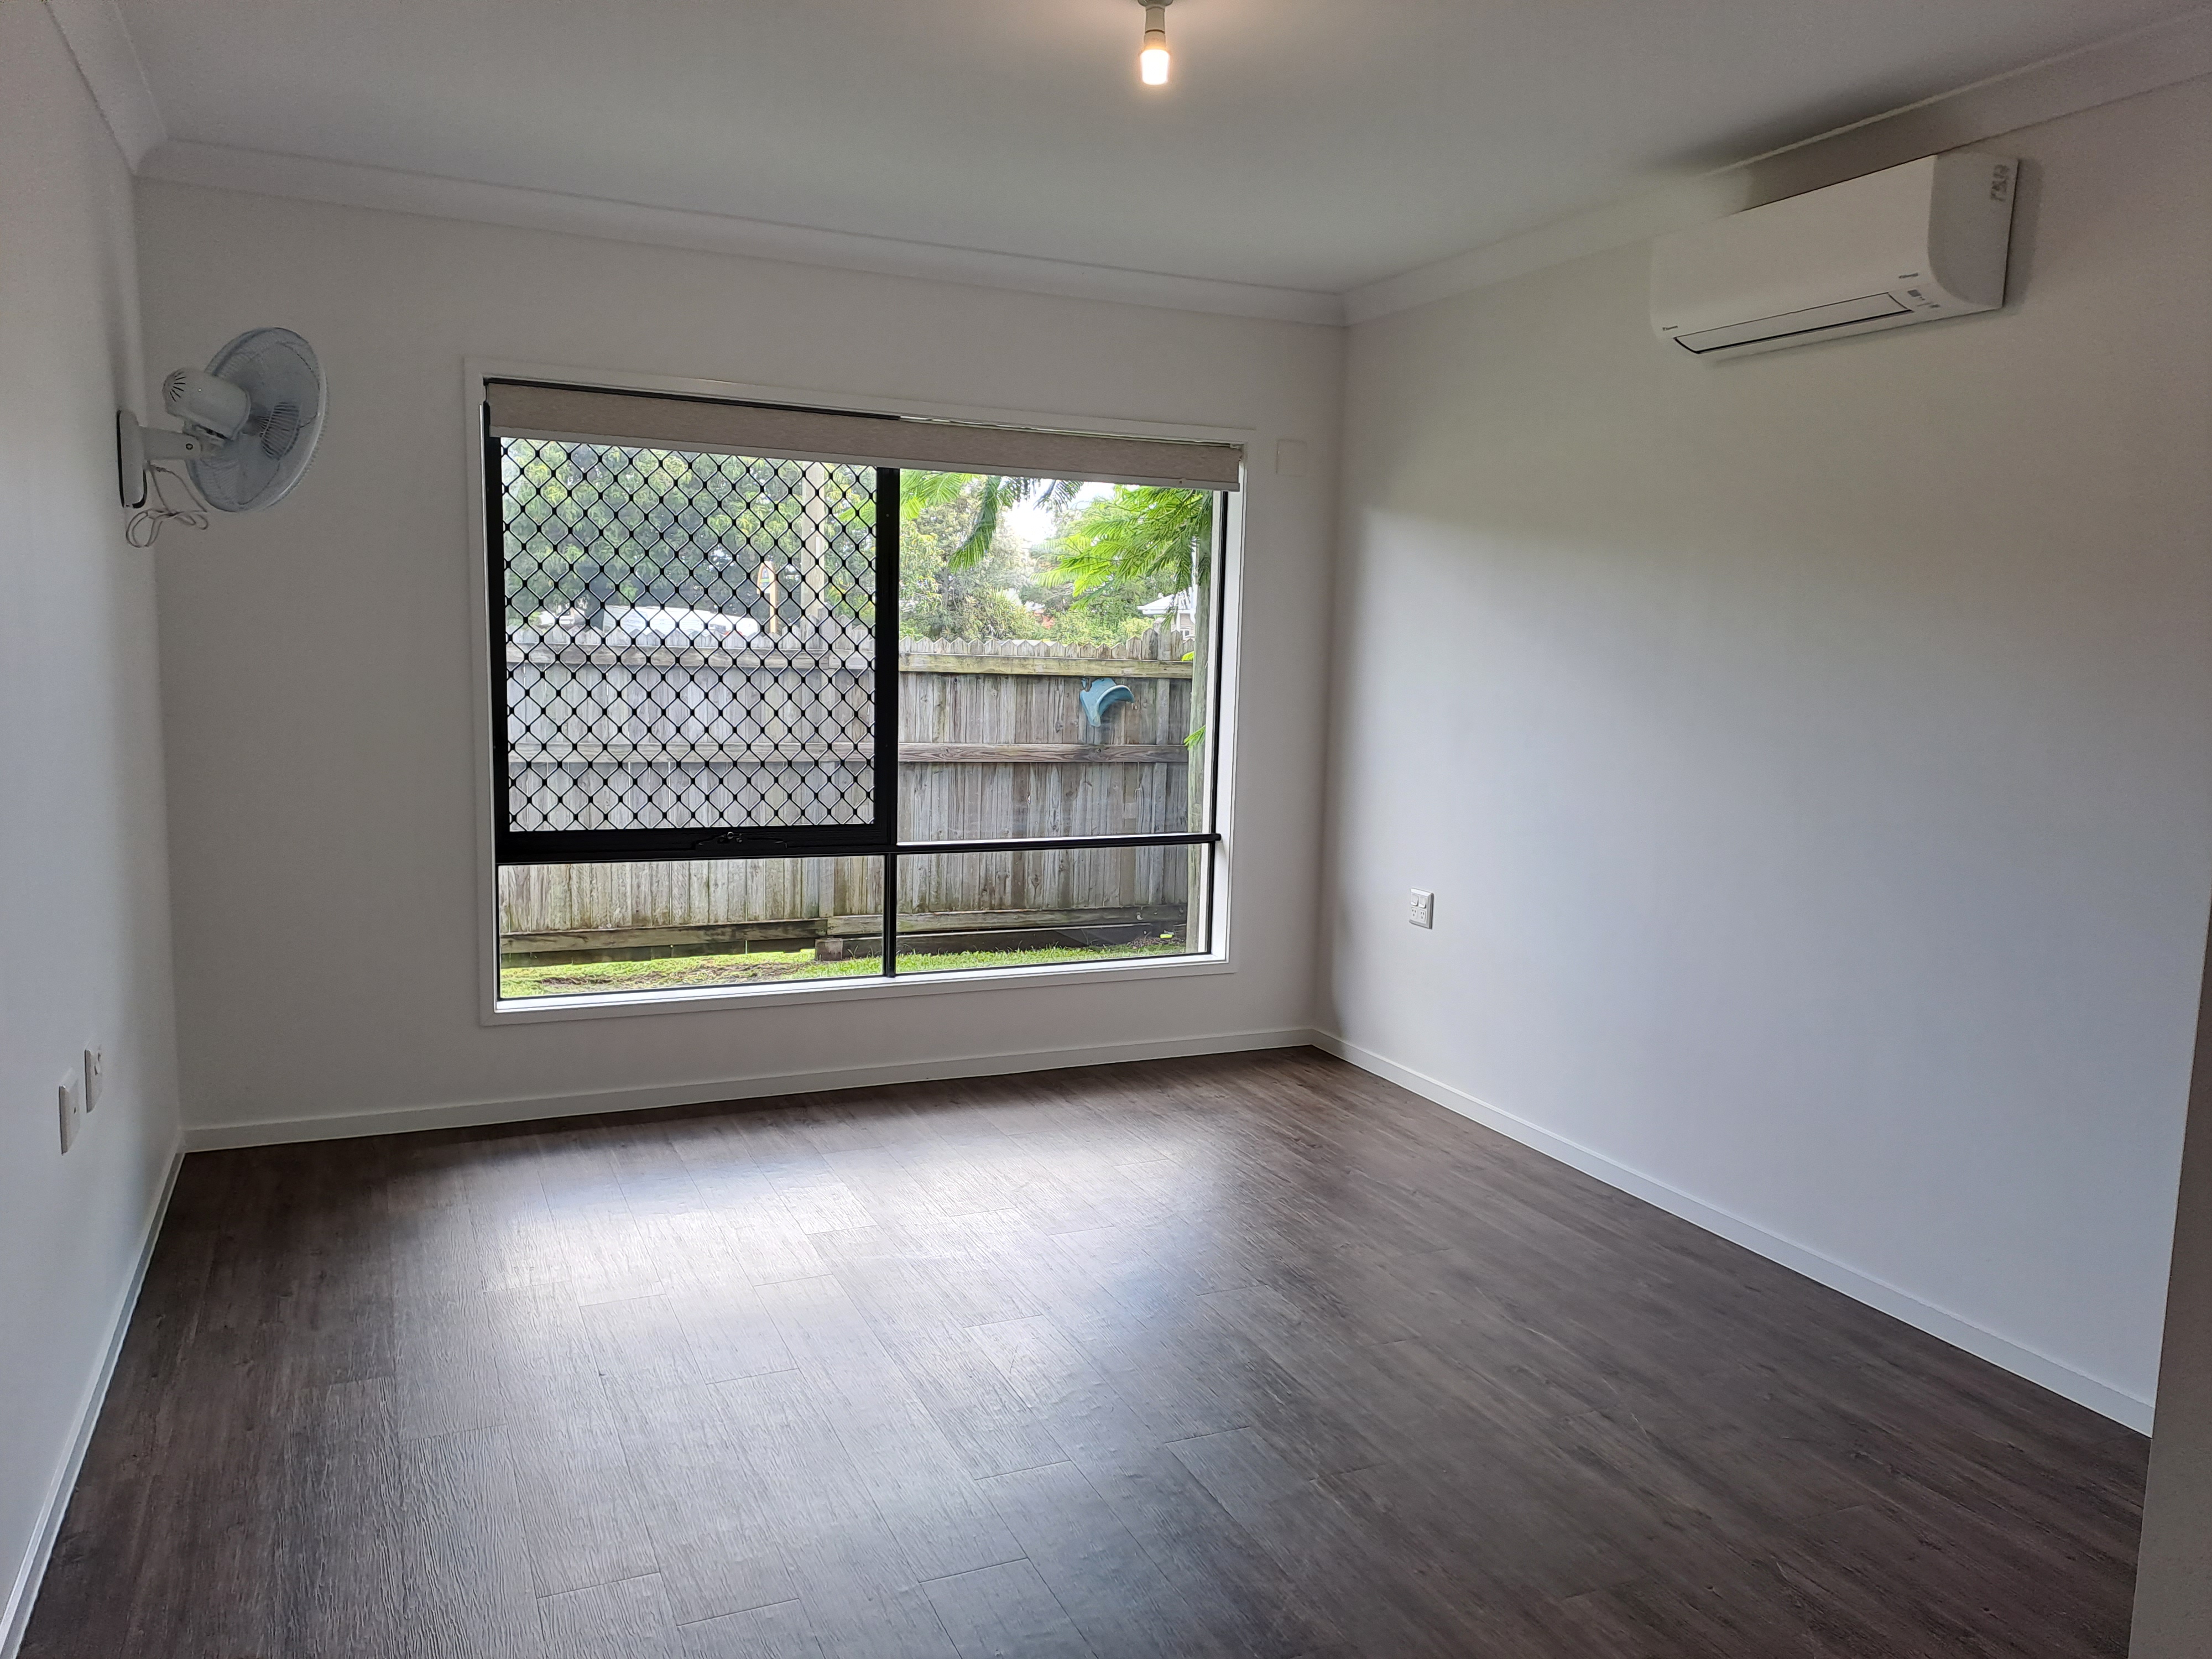 An empty bedroom with light walls and an air con unit